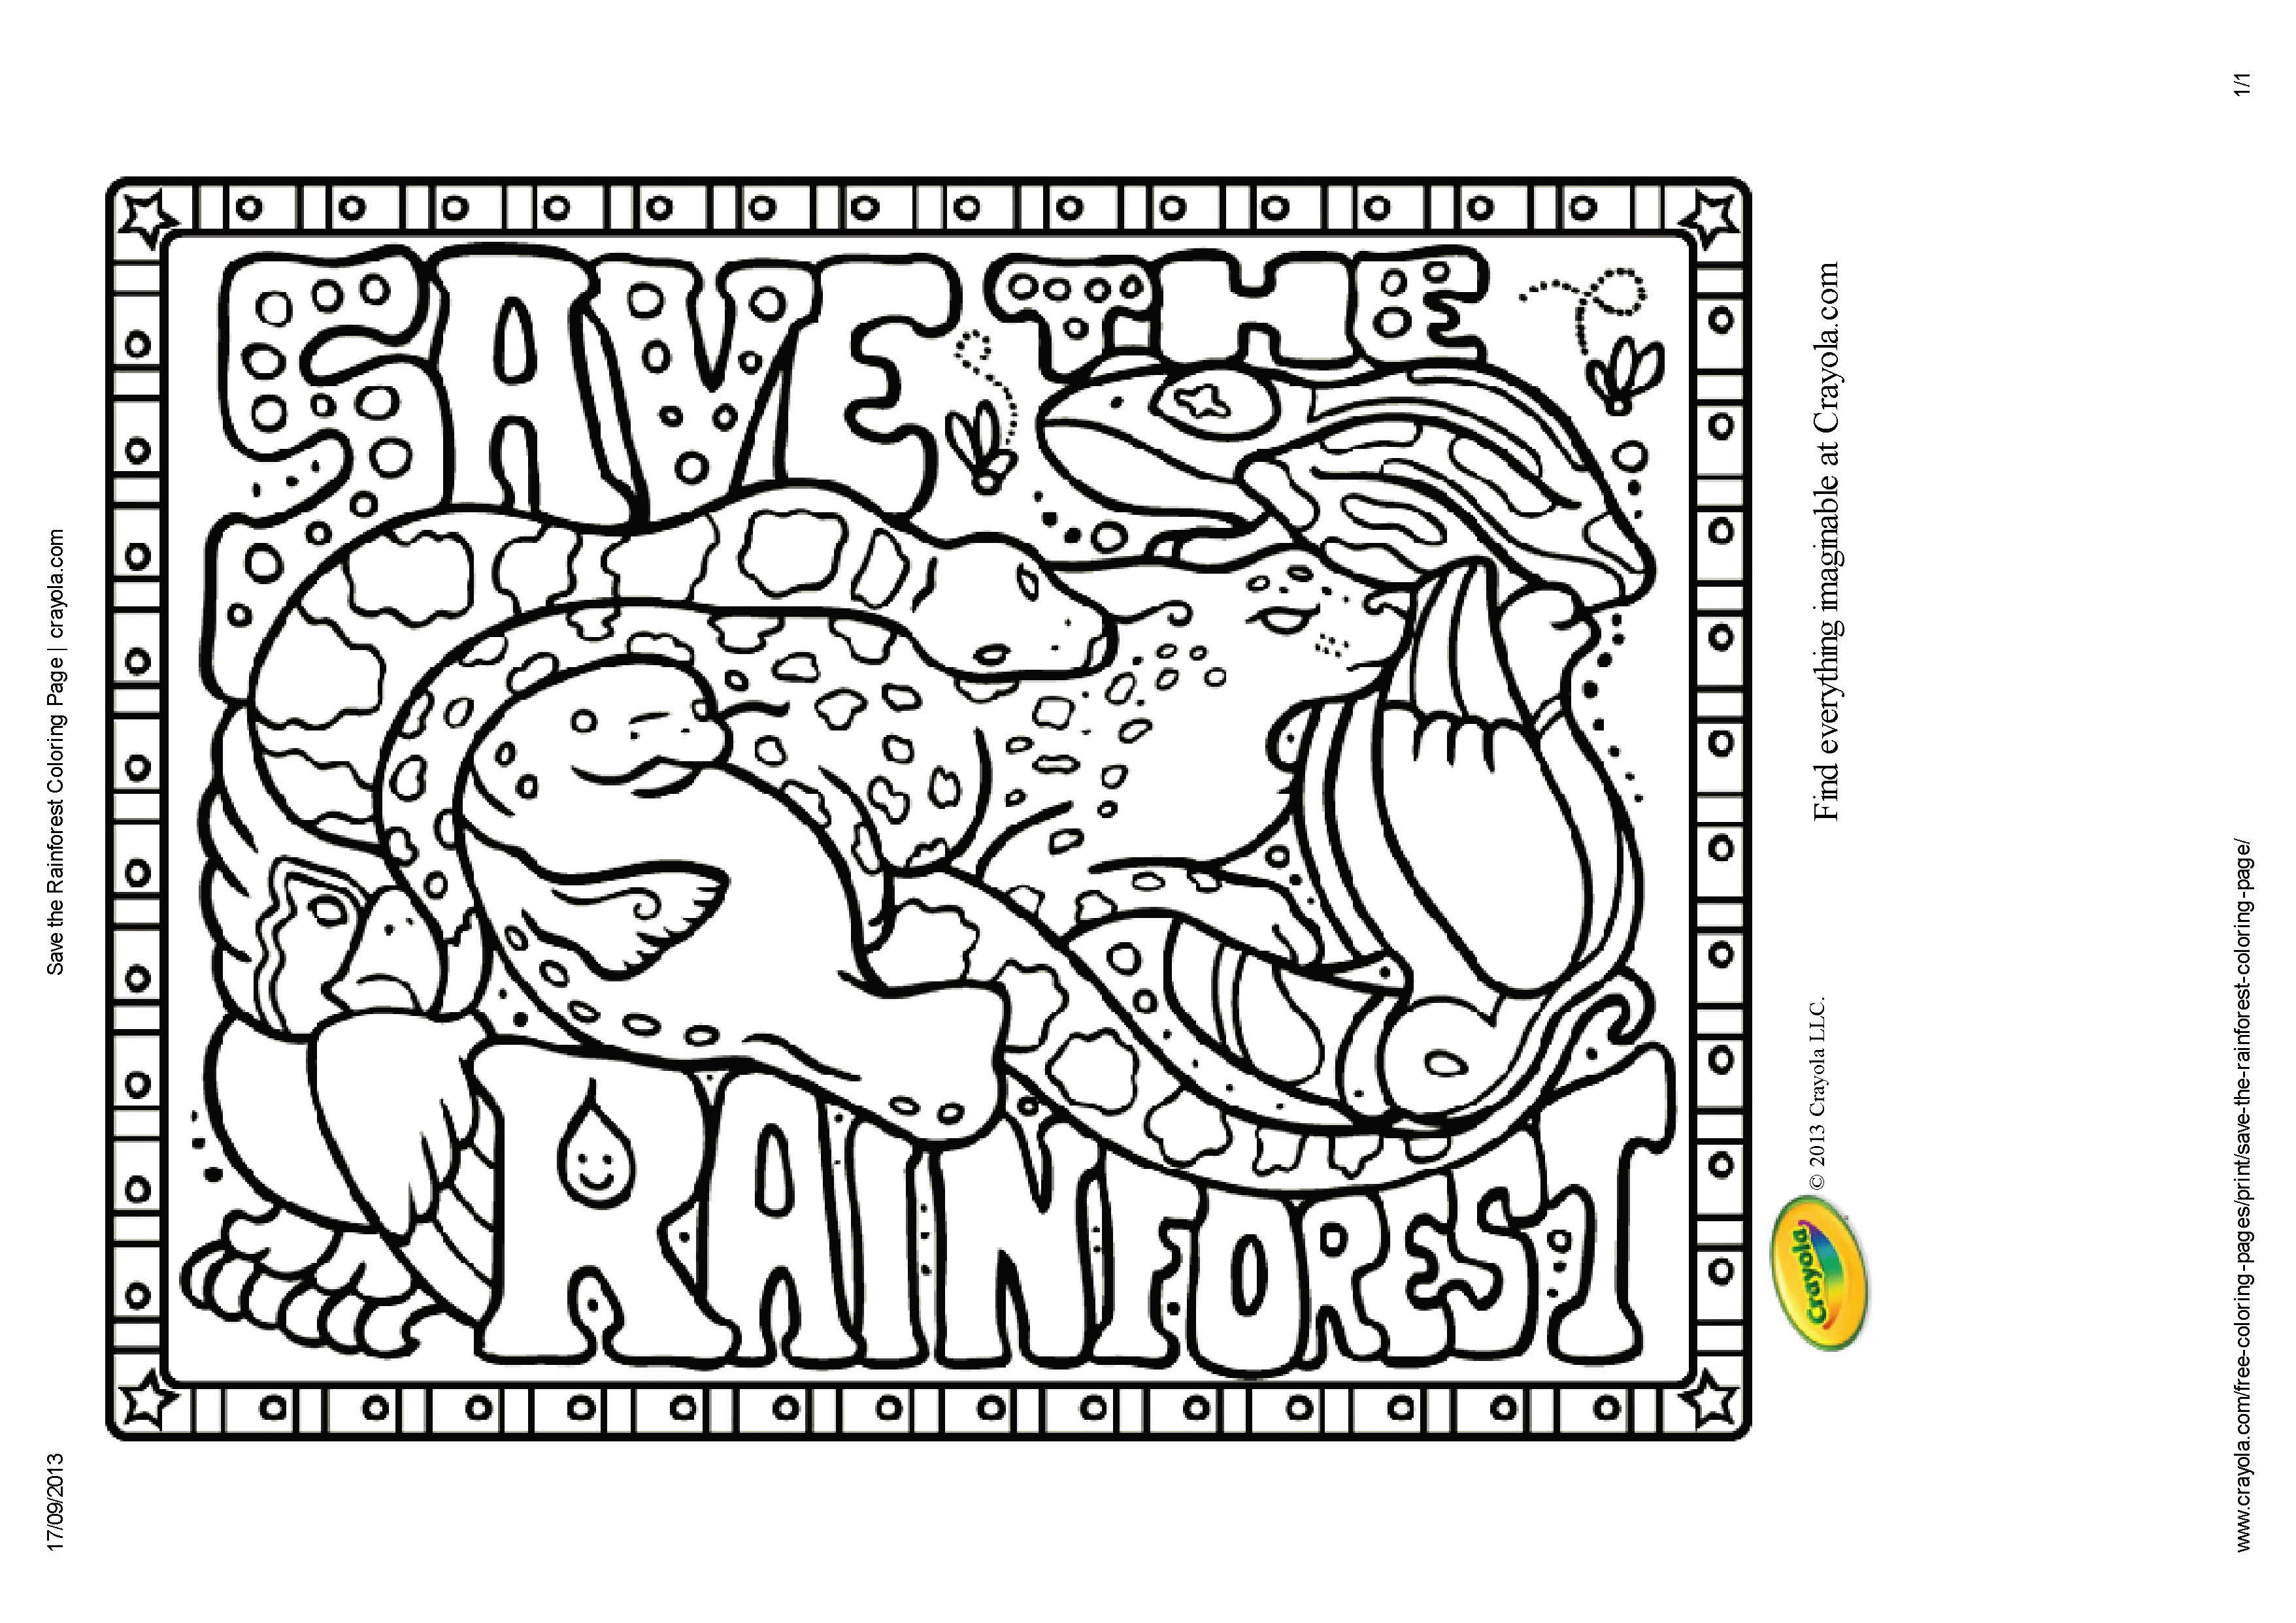 Animals In The Rainforest Coloring Pages 8 Pics Of Rainforest Coloring Pages Rainforest Animal Coloring